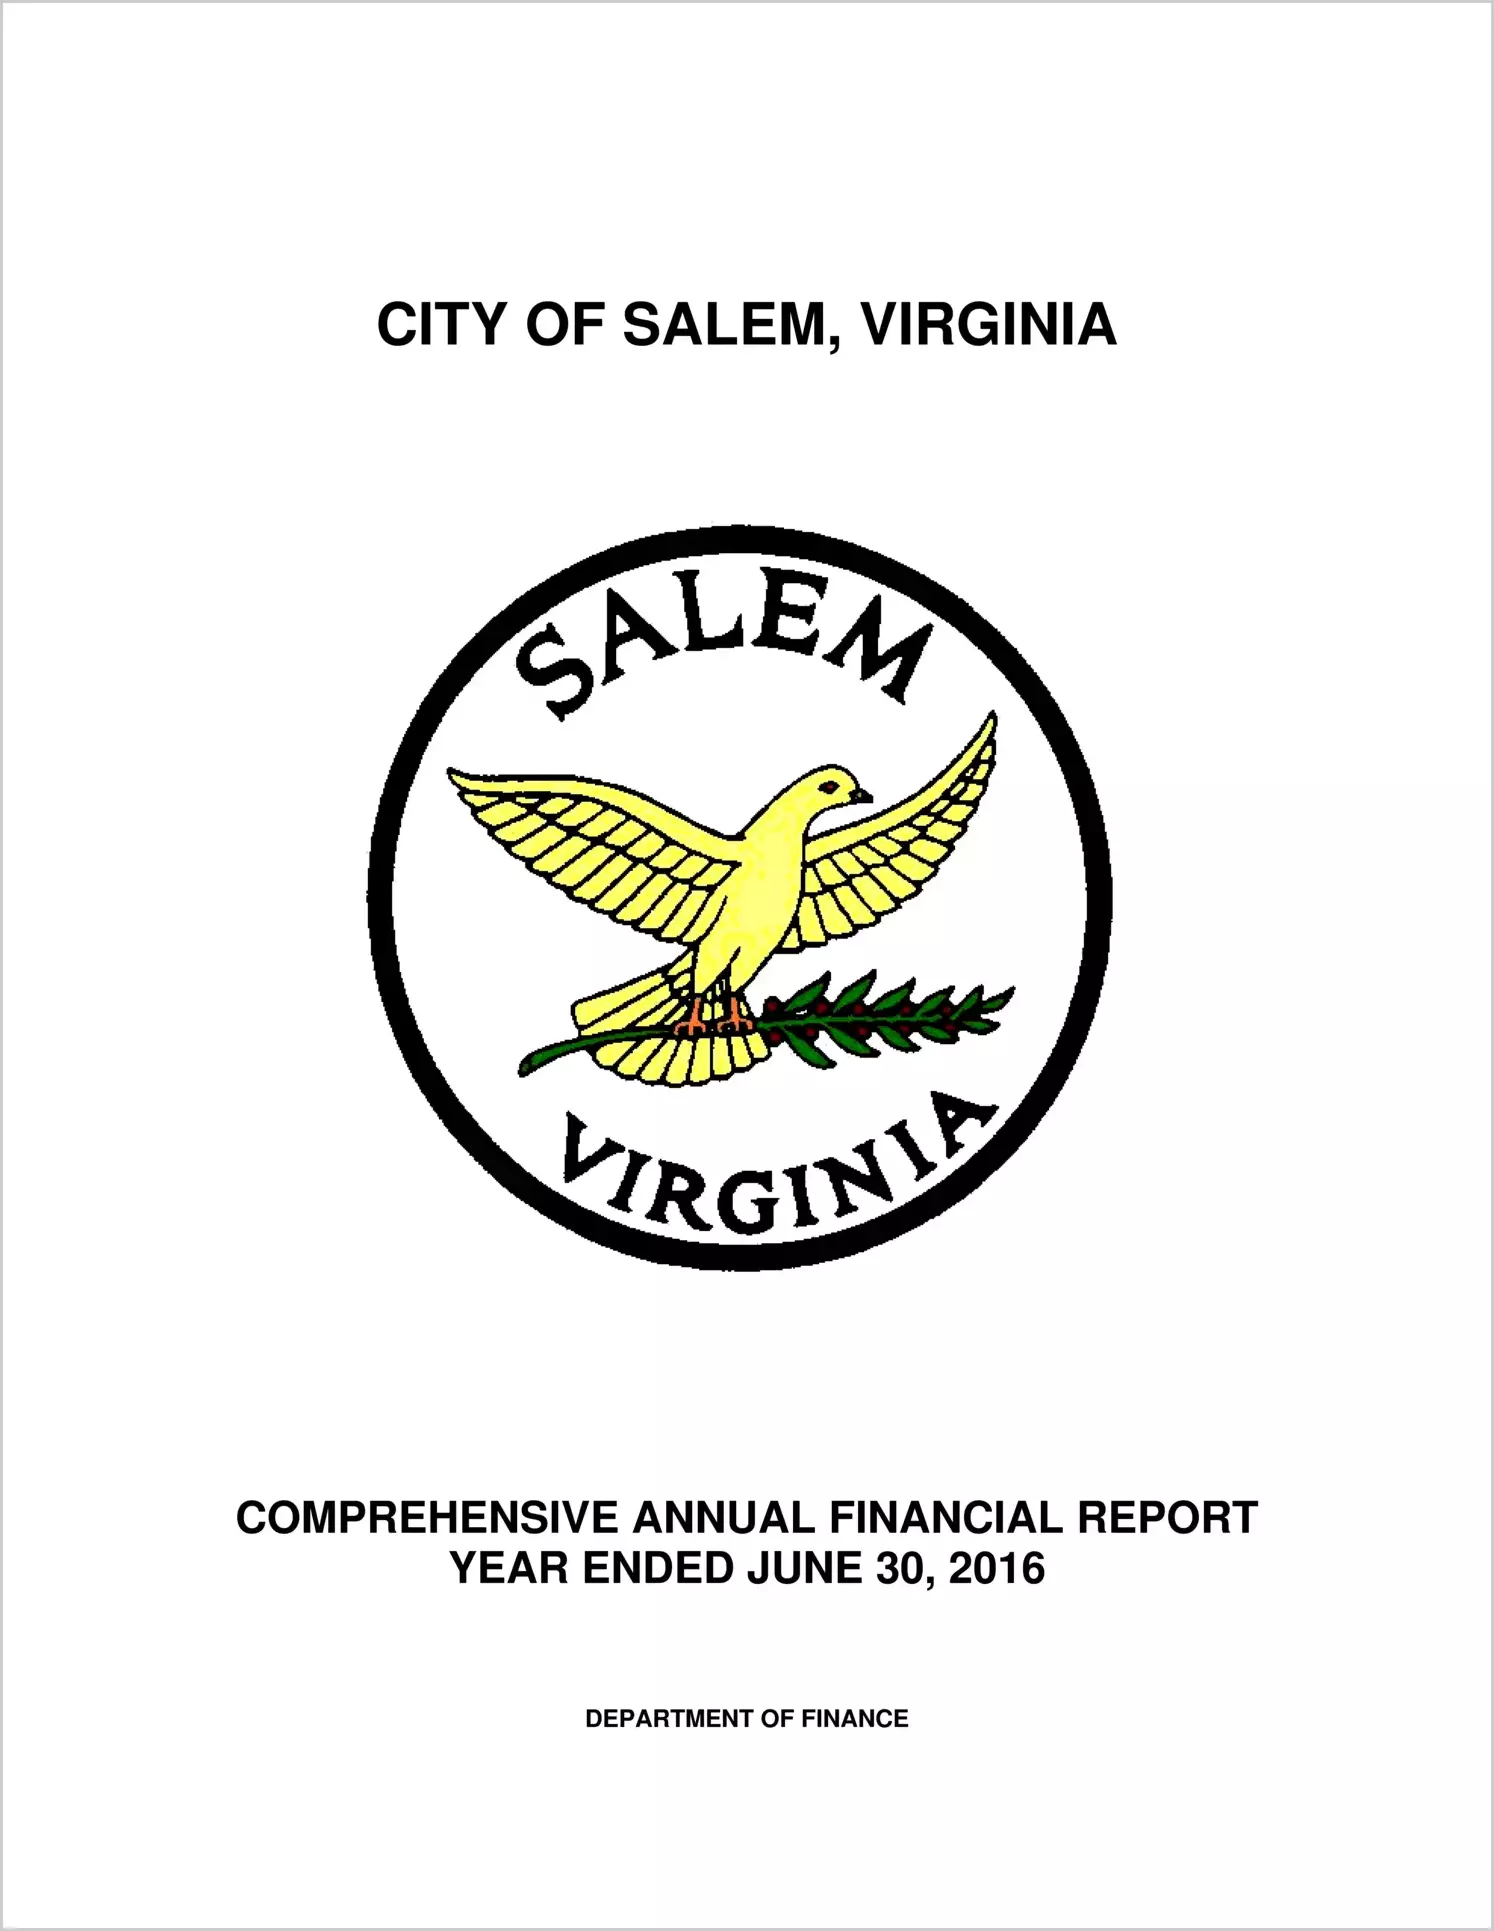 2016 Annual Financial Report for City of Salem